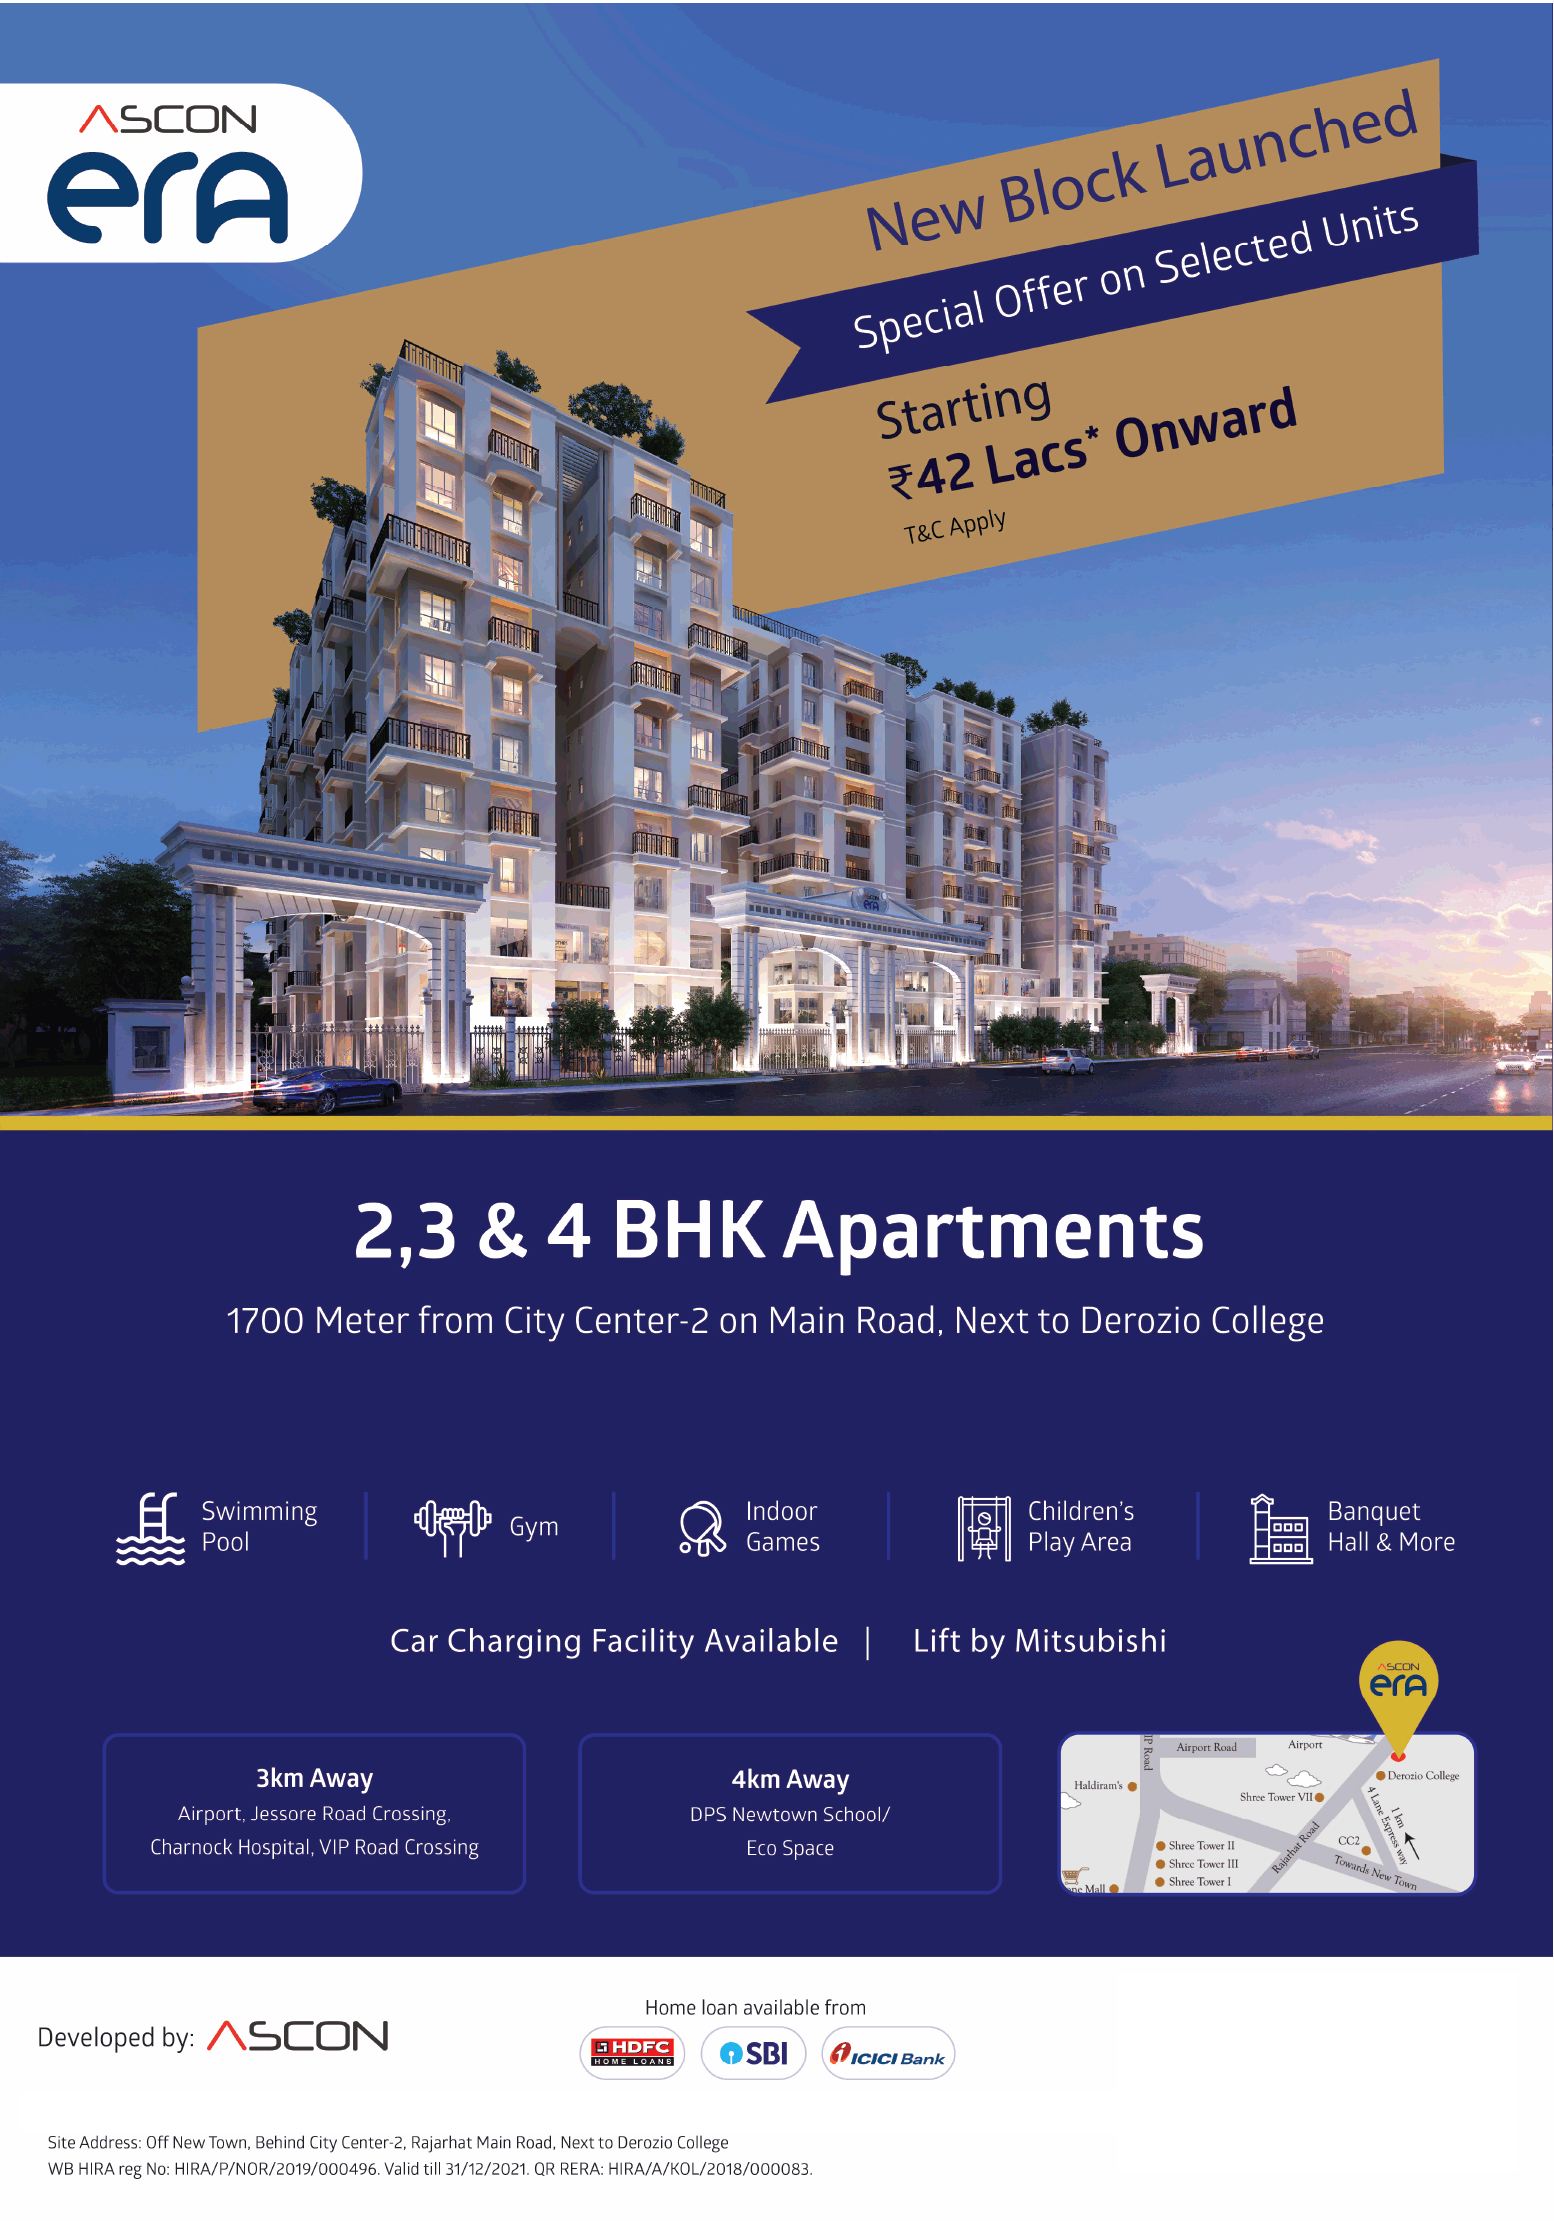 Special offer on selected units starting Rs42 Lacs onward at Ascon Era, Kolkata Update